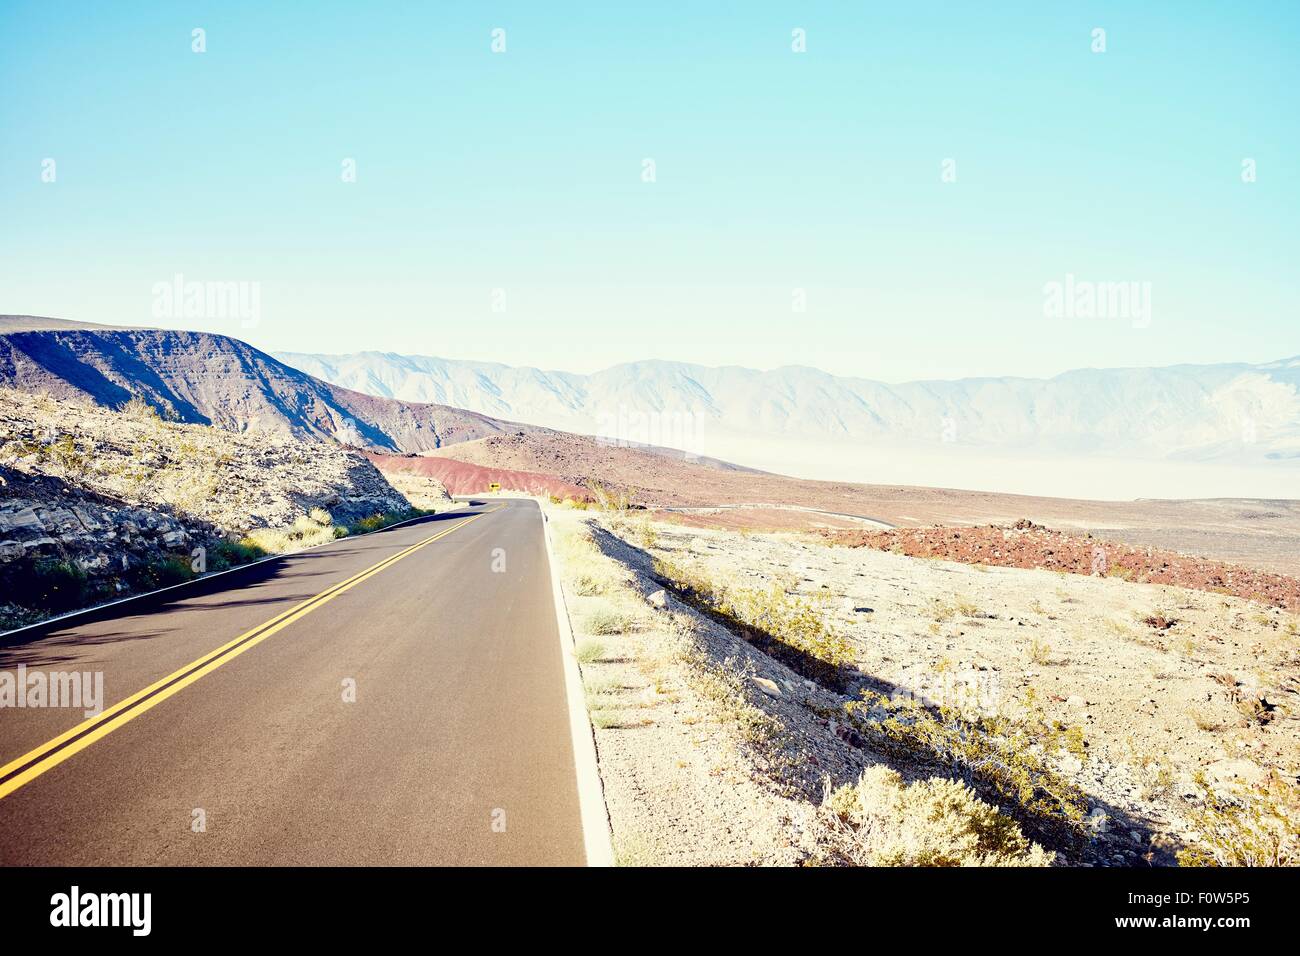 Landscape view of straight desert road, Death Valley, California, USA Stock Photo